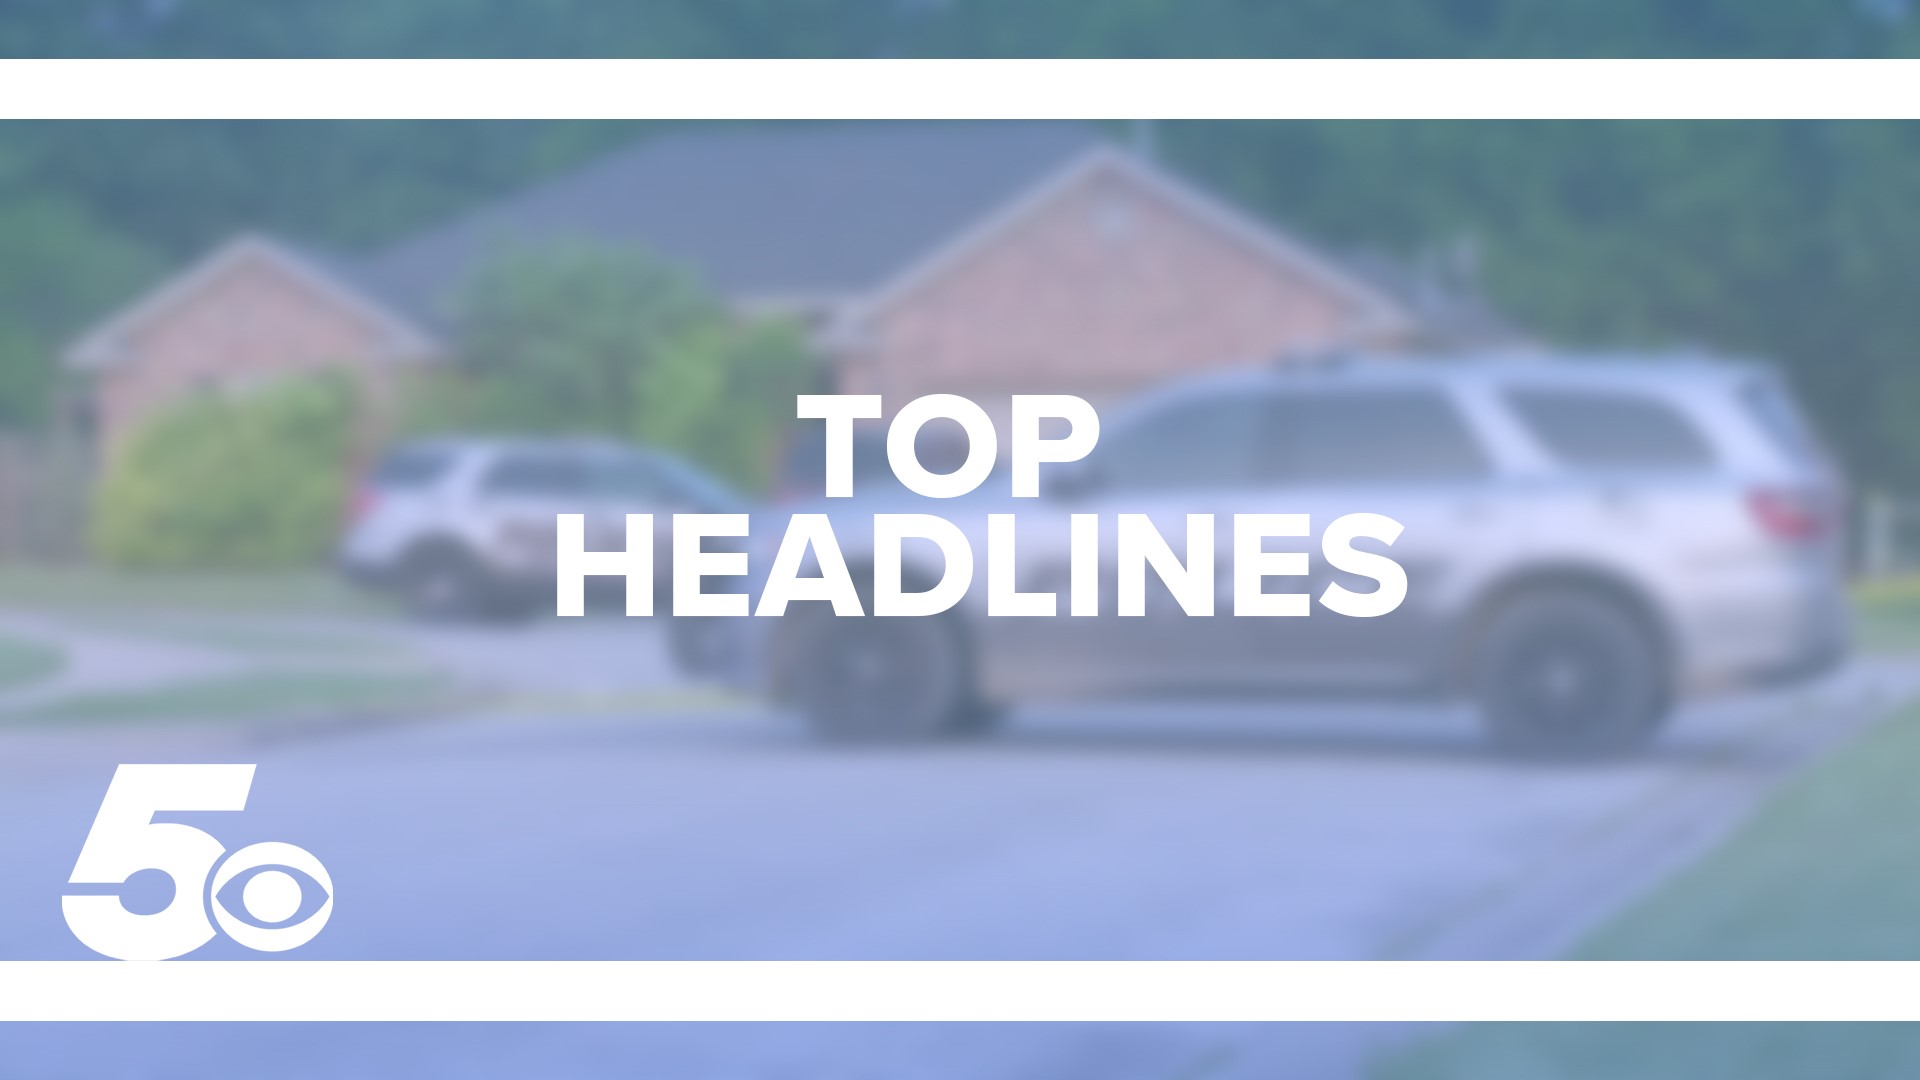 Take a look at some of this week's top headlines for local news across Northwest Arkansas and the River Valley.